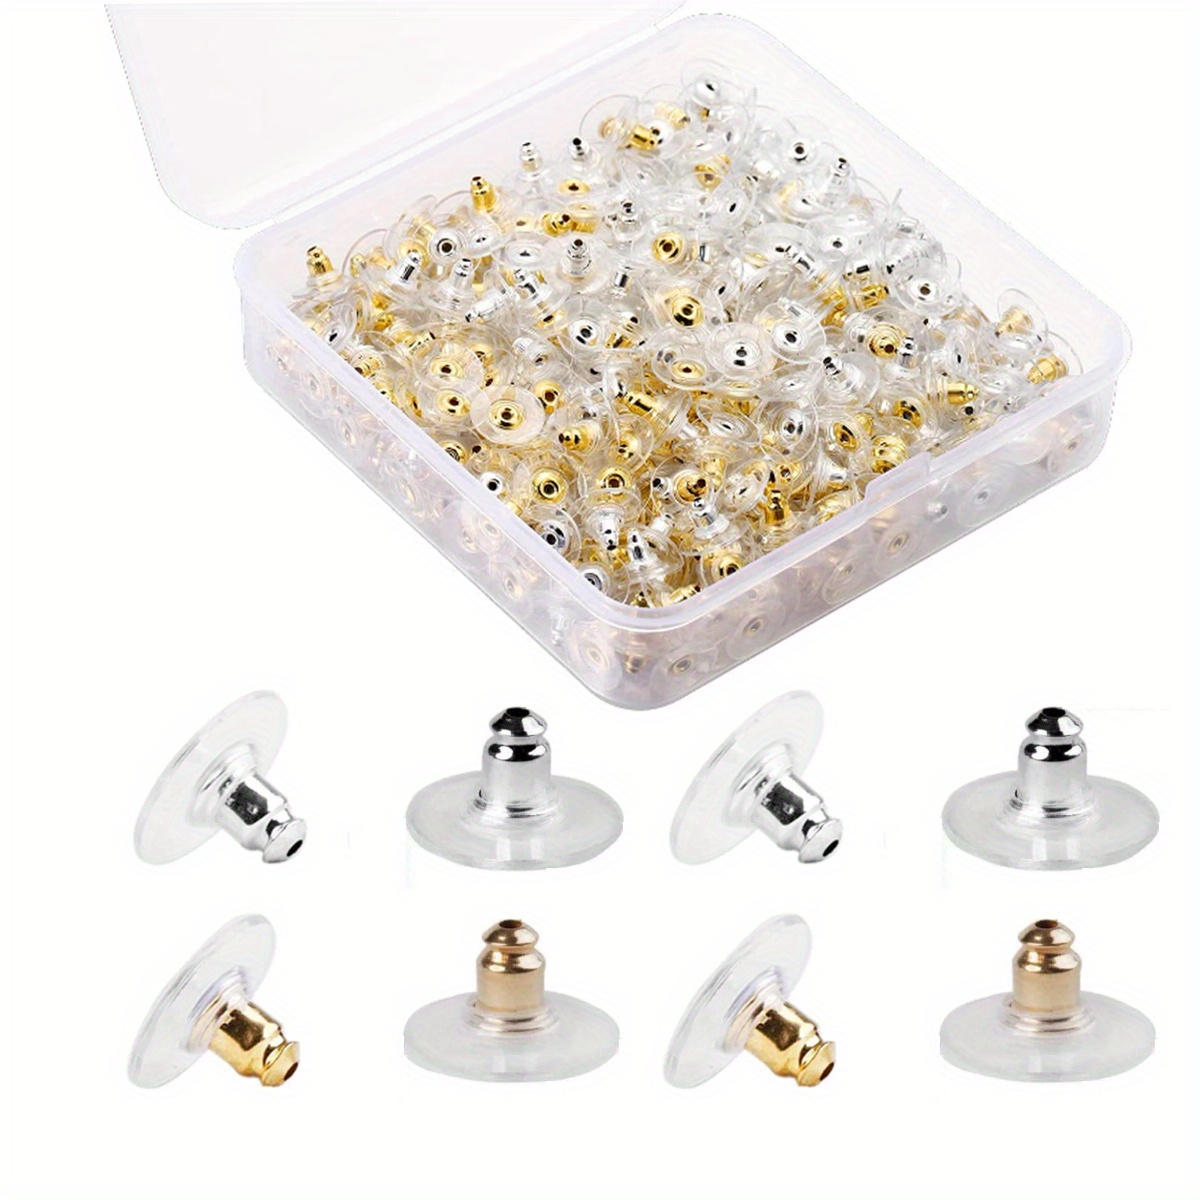 100 Pieces Bullet Clutch Earring Backs for Studs with Pad Rubber Earring Stoppers Pierced Safety Backs (Silver)